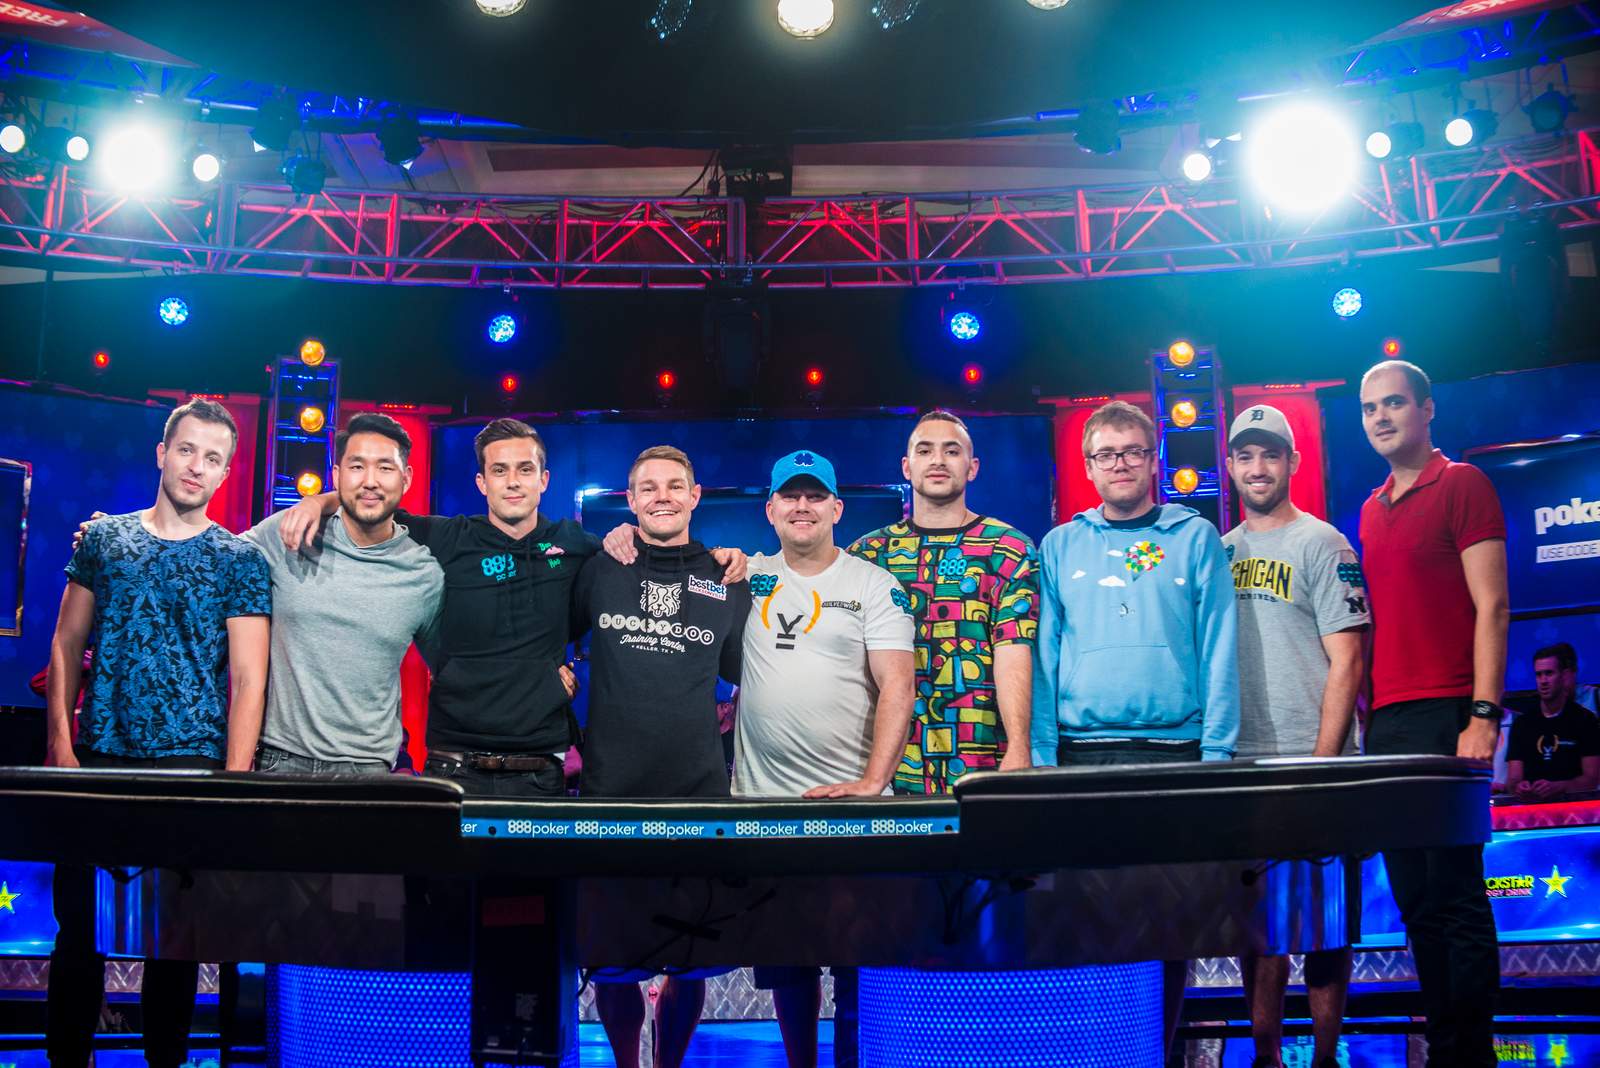 2018 WSOP Main Event Final Table: Where to Watch?